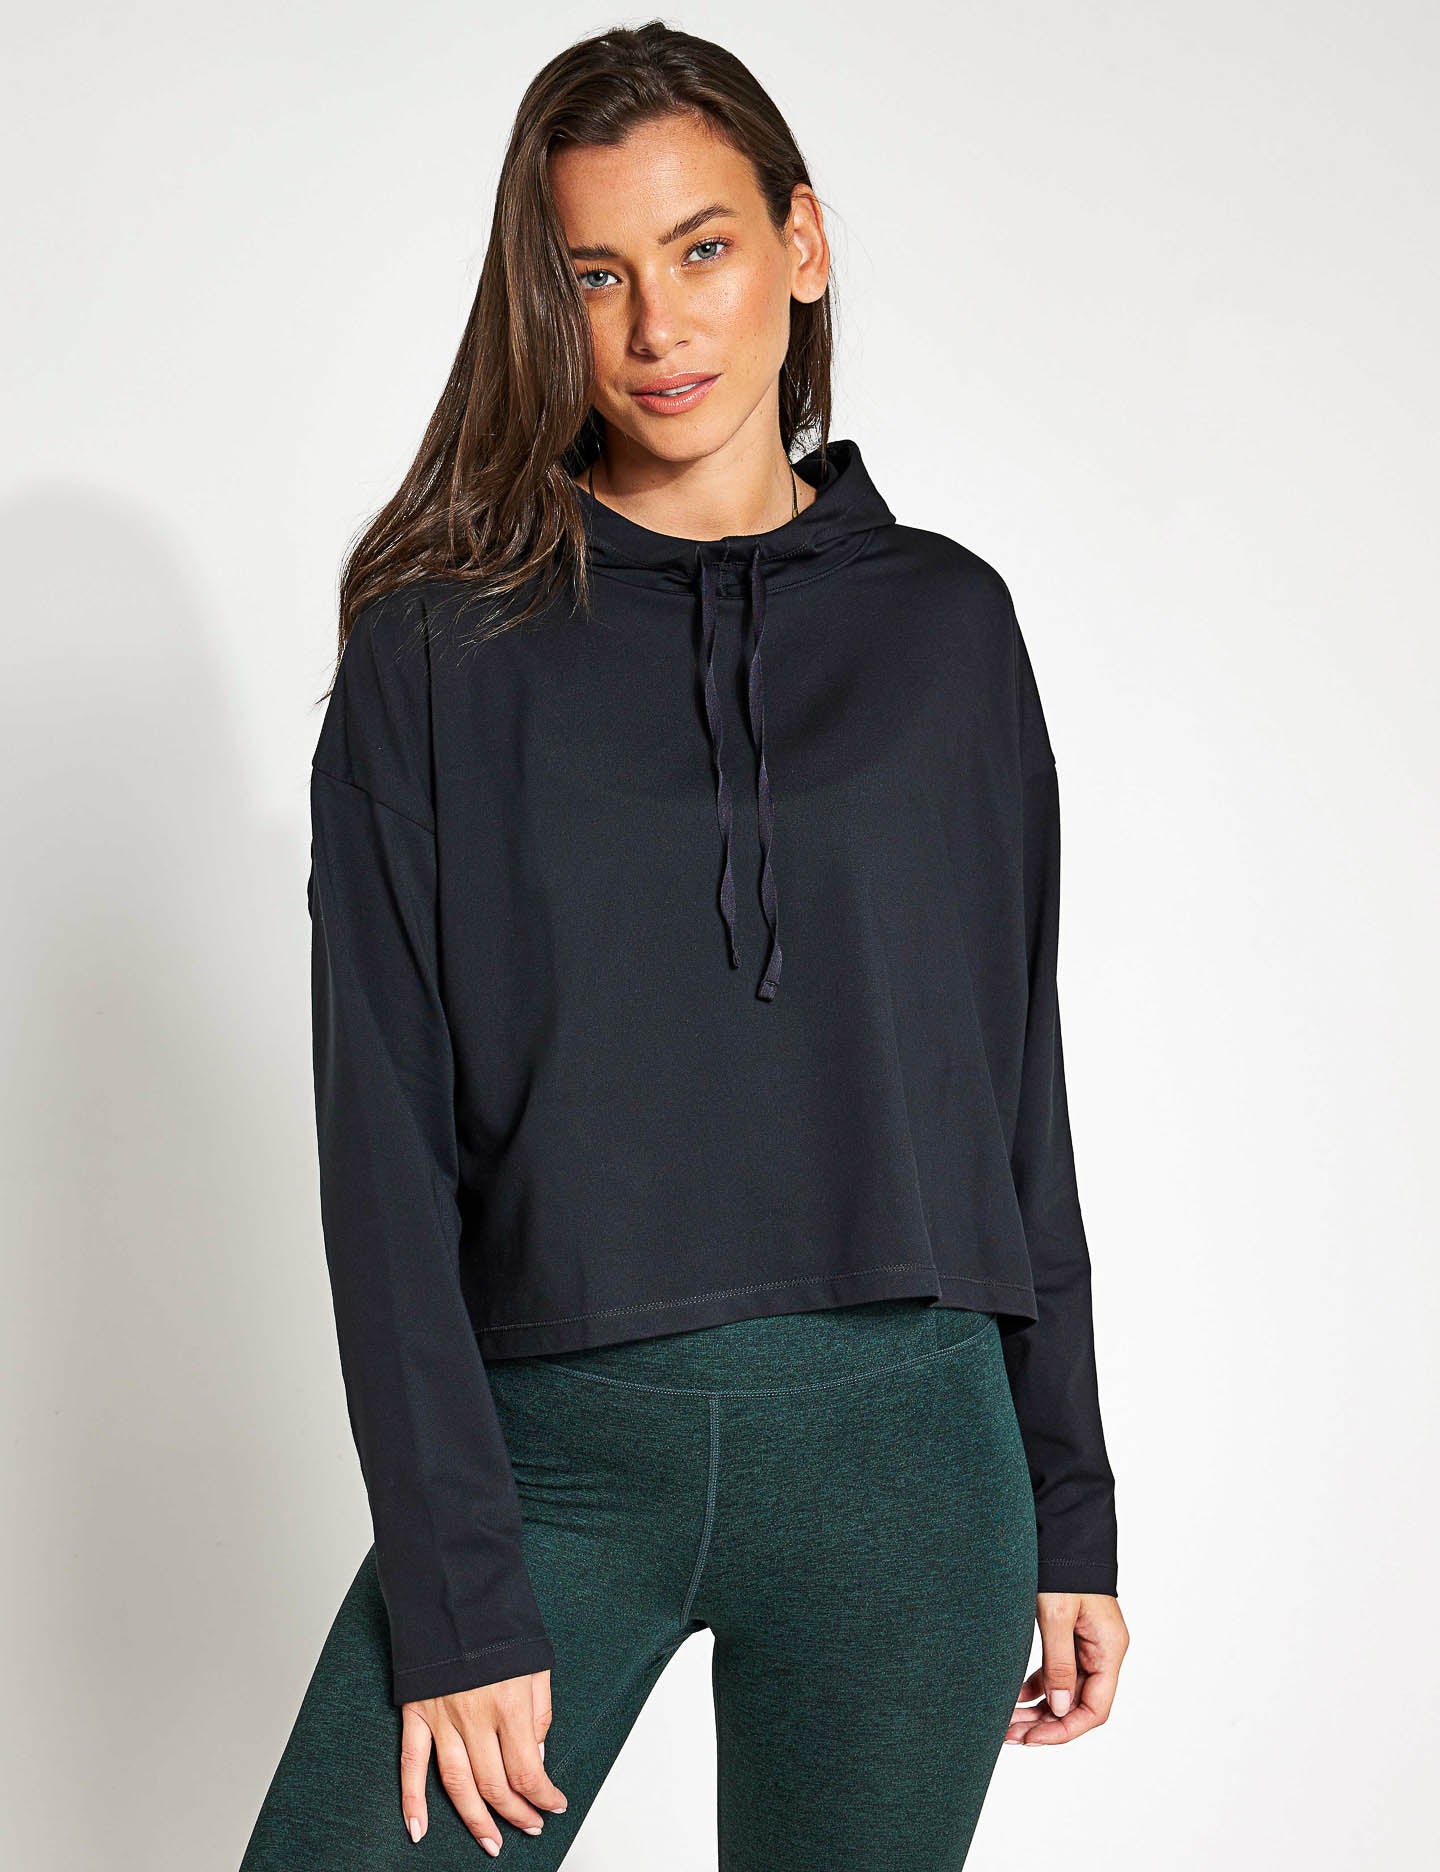 Girlfriend Collective | ReSet Hoodie - Black | The Sports Edit